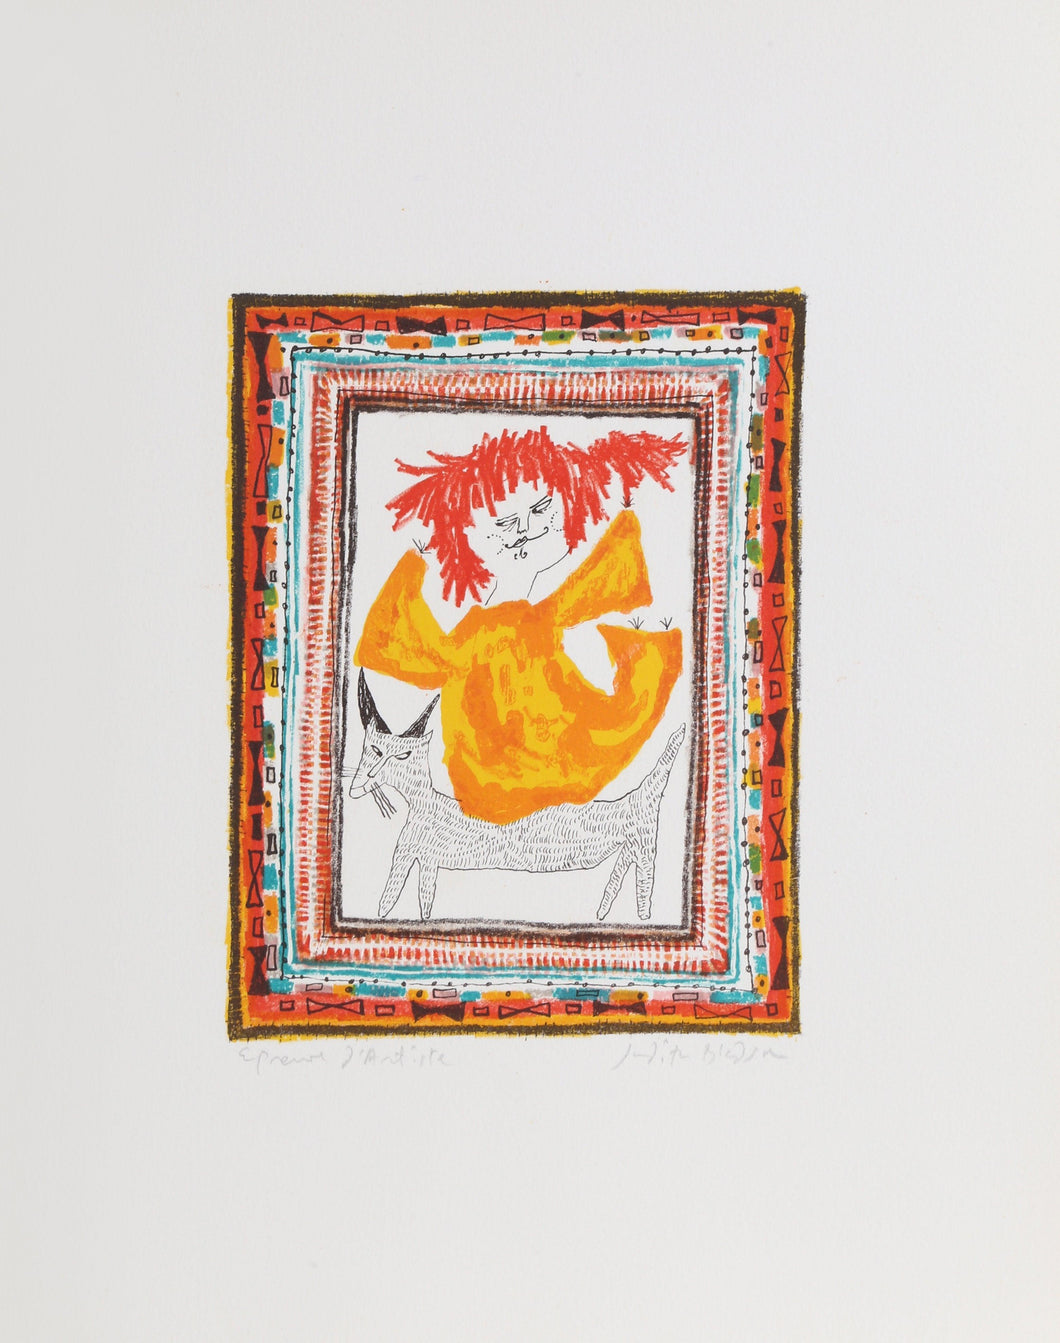 Petite Portrait - Red Hair Girl Lithograph | Judith Bledsoe,{{product.type}}